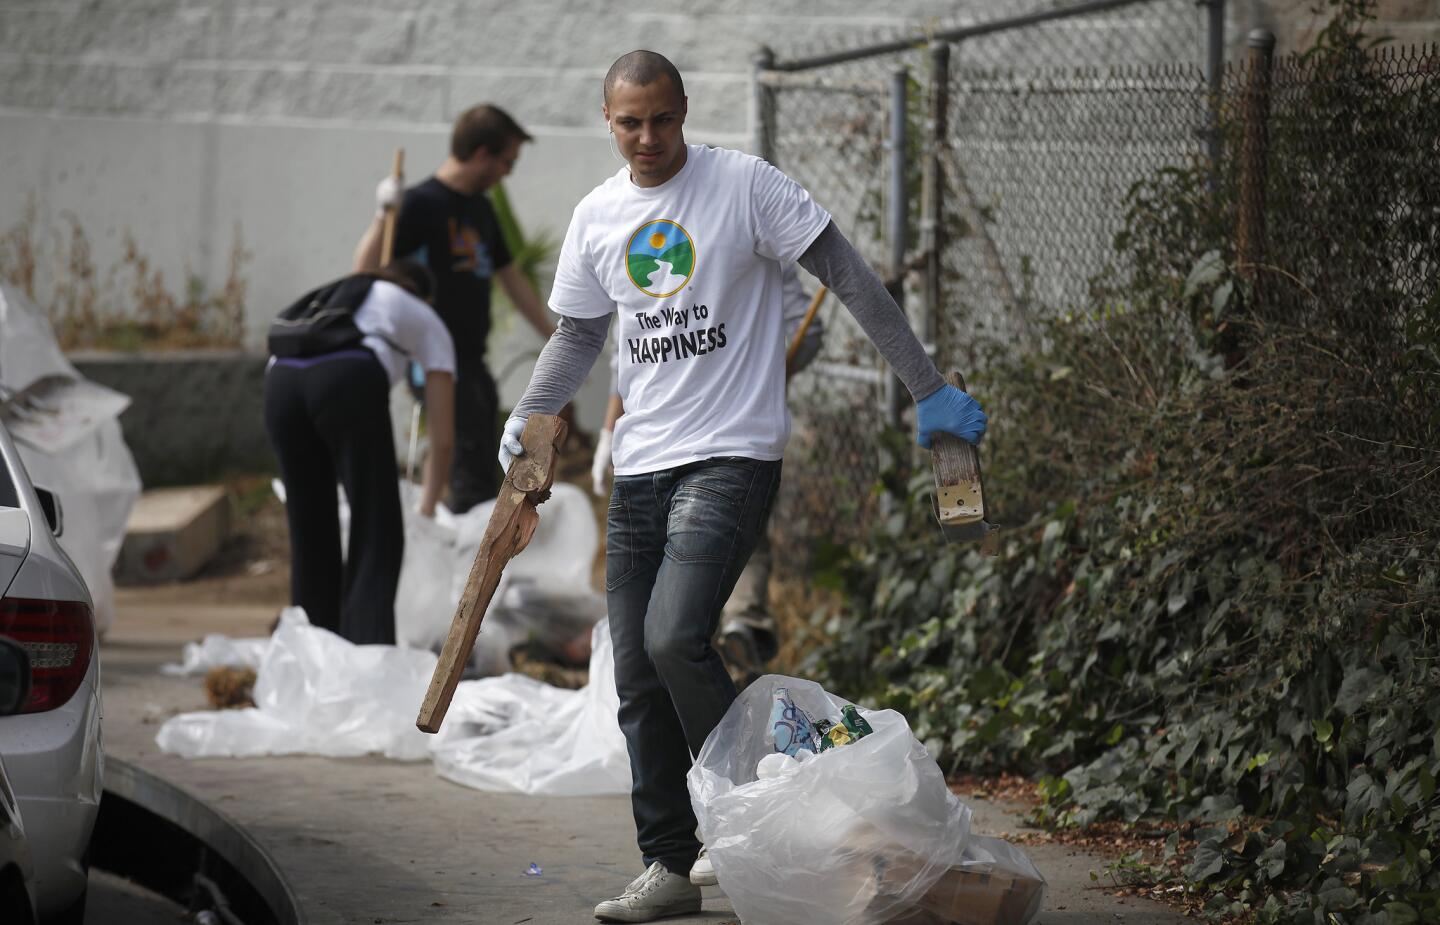 Cleaning up the street of L.A.